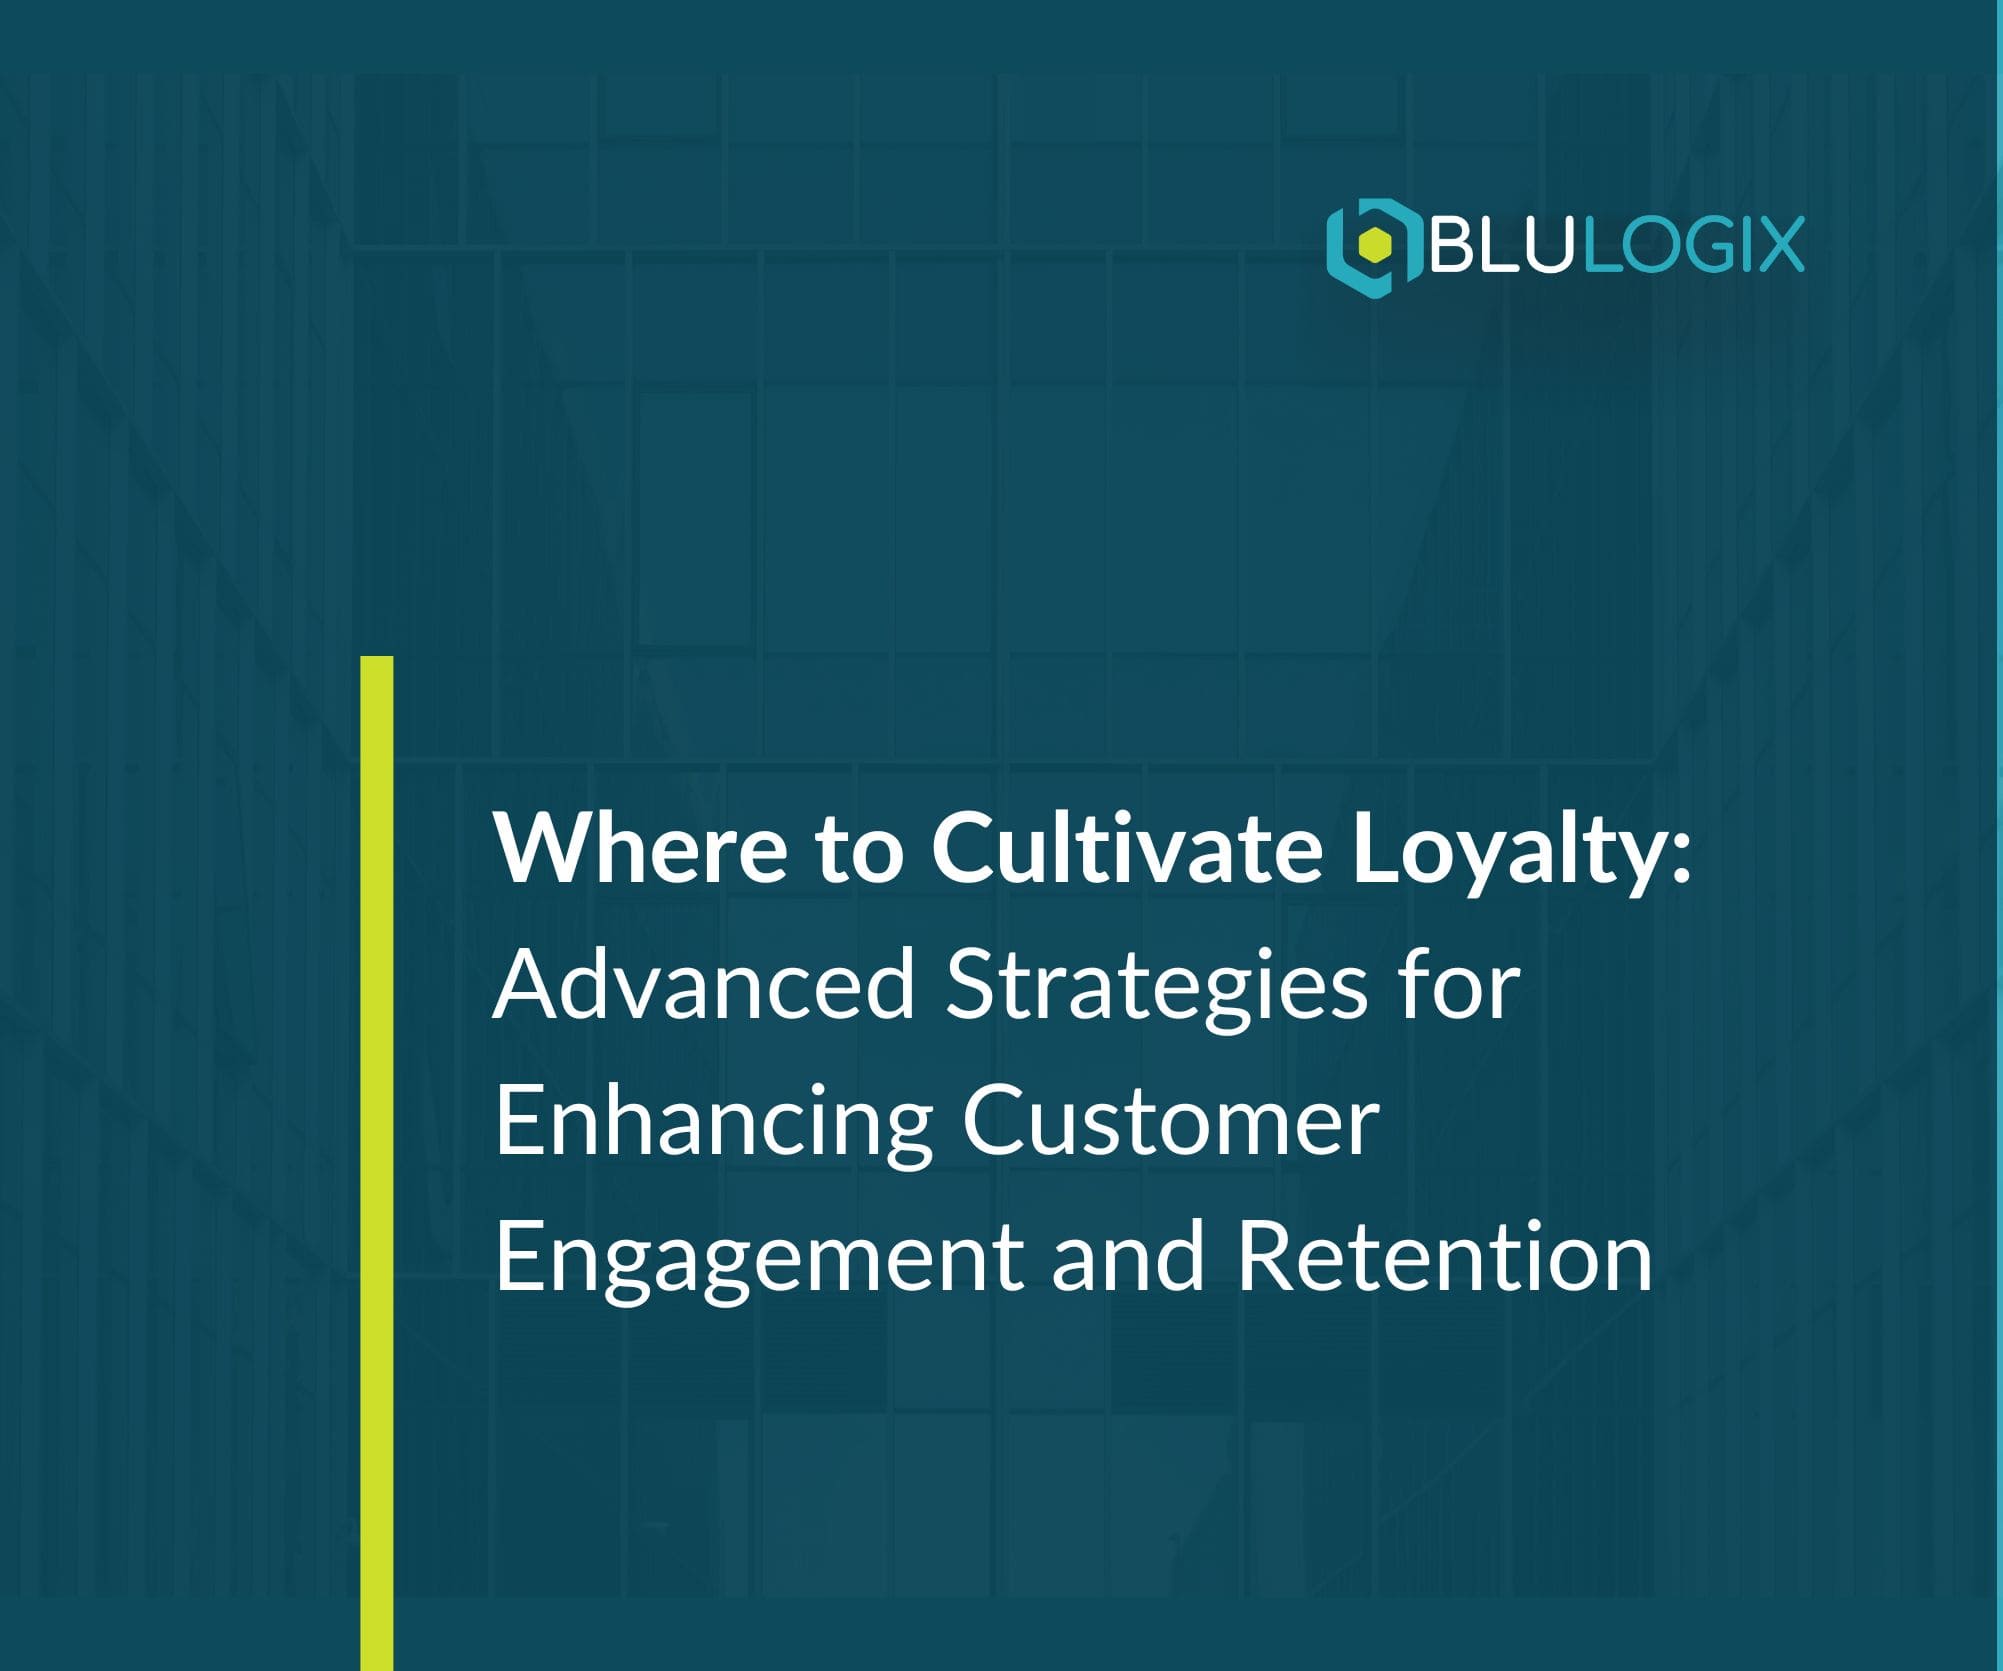 Advanced Strategies for Enhancing Customer Engagement and Retention